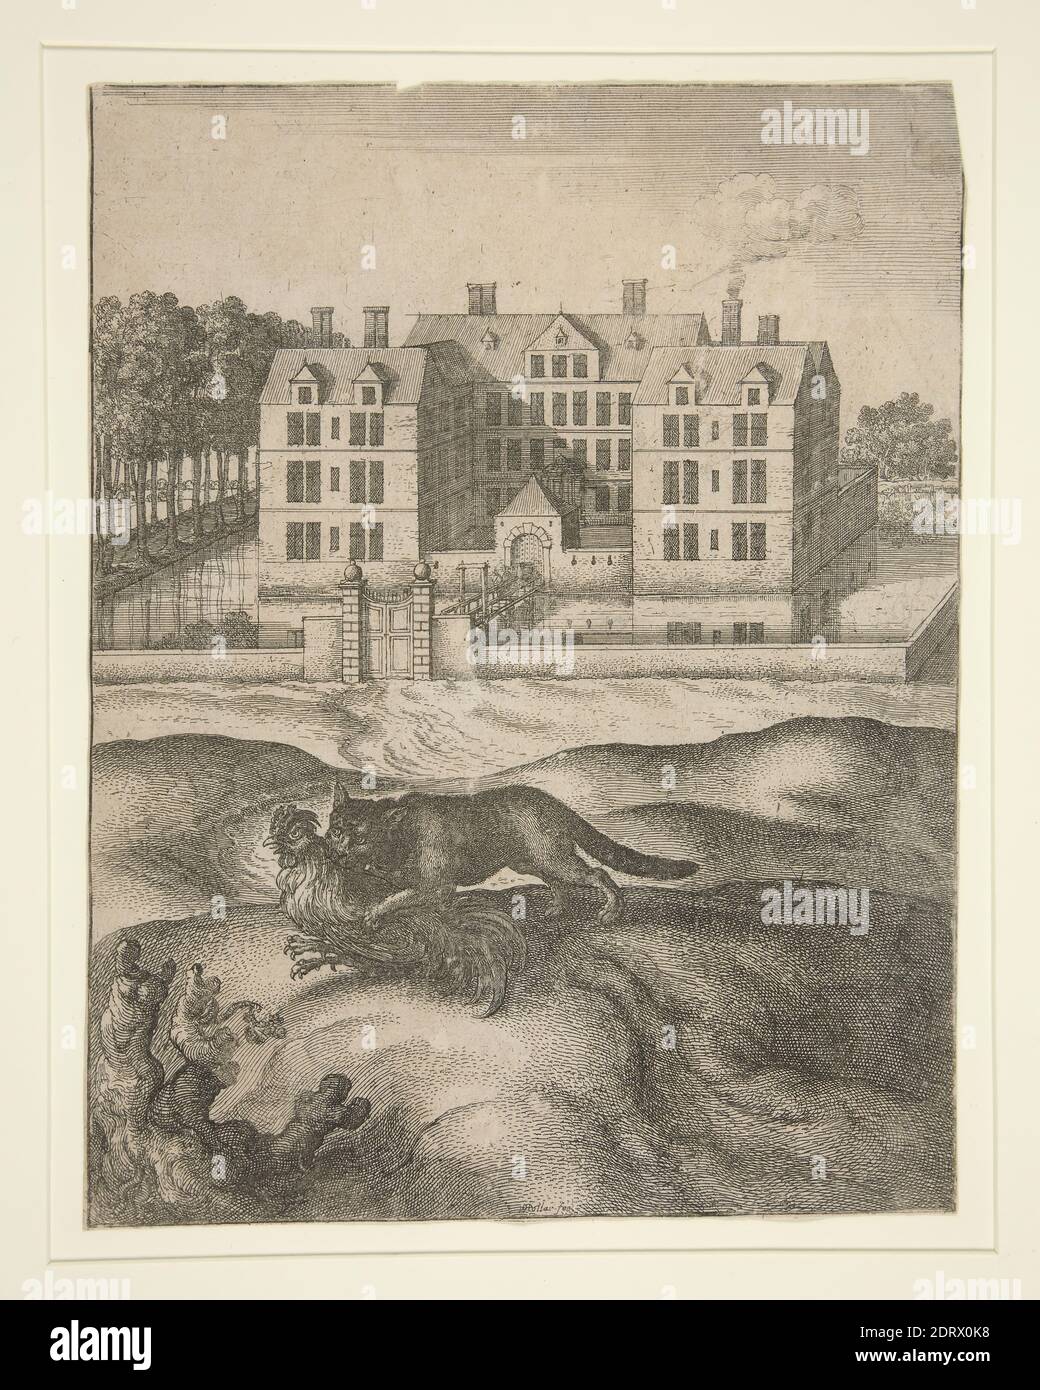 Artist: Wenceslaus Hollar, Bohemian, 1607–1677, Der Fuchs und der Hahn (The Fox and the Rooster), from the series Kleinere Kupfer zum Aesop (Small Copperplates for Aesop), Etching, sheet: 21.3 × 17 cm (8 3/8 × 6 11/16 in.), Made in Bohemia, Czech Republic, Bohemian, 17th century, Works on Paper - Prints Stock Photo